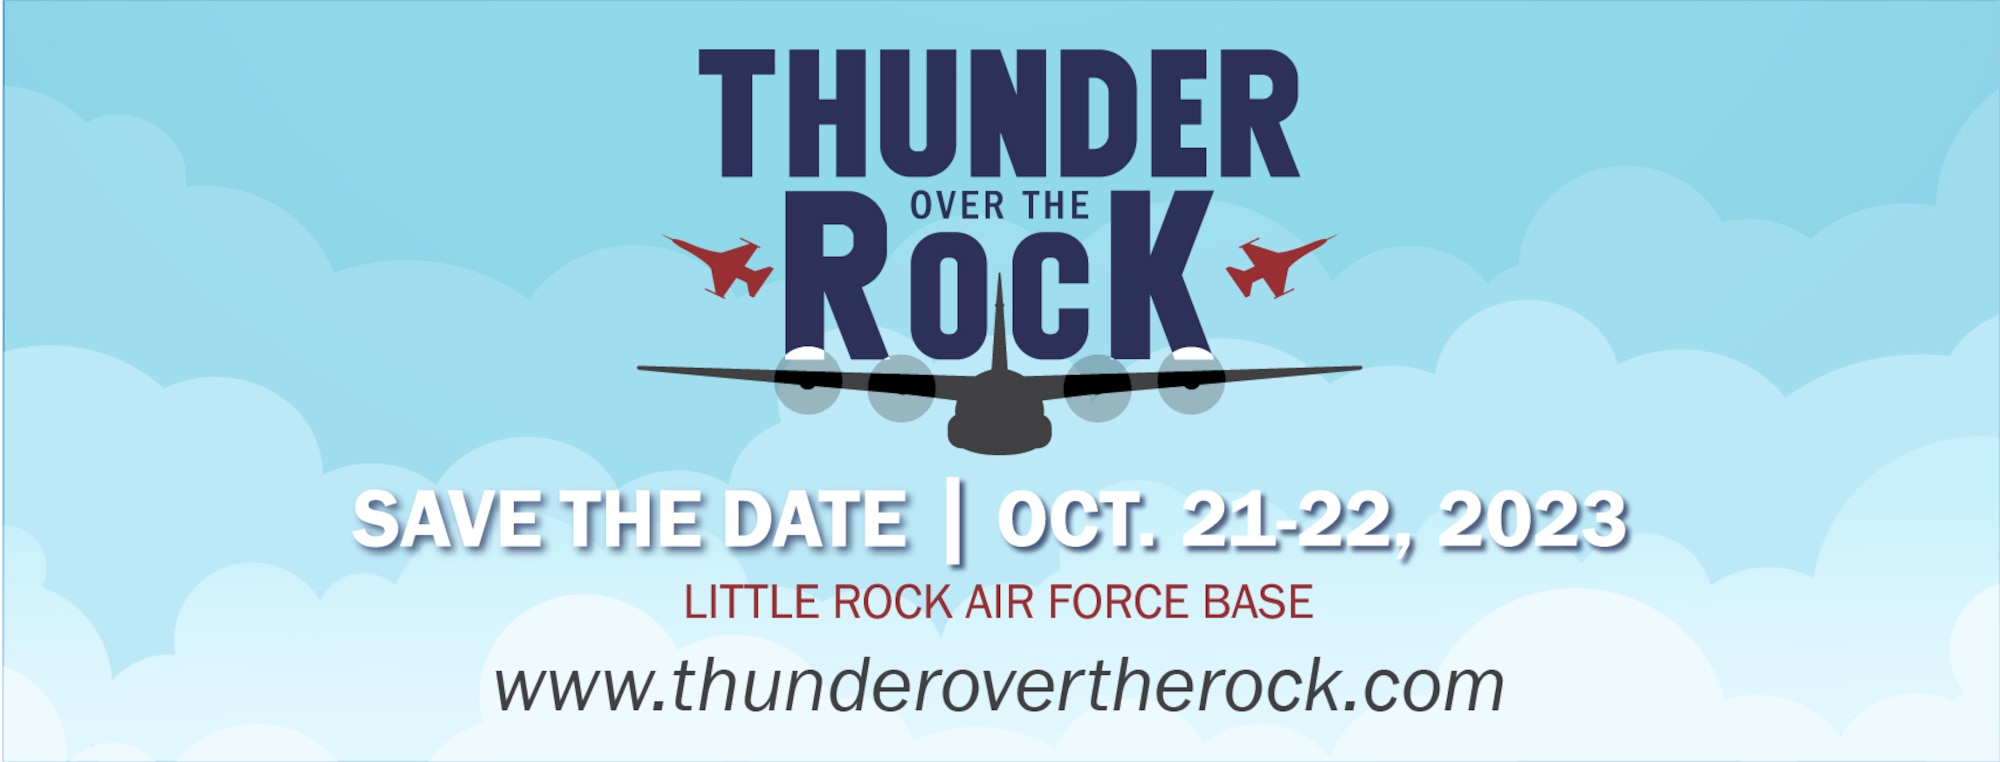 Thunder Over The Rock 2023 Graphic